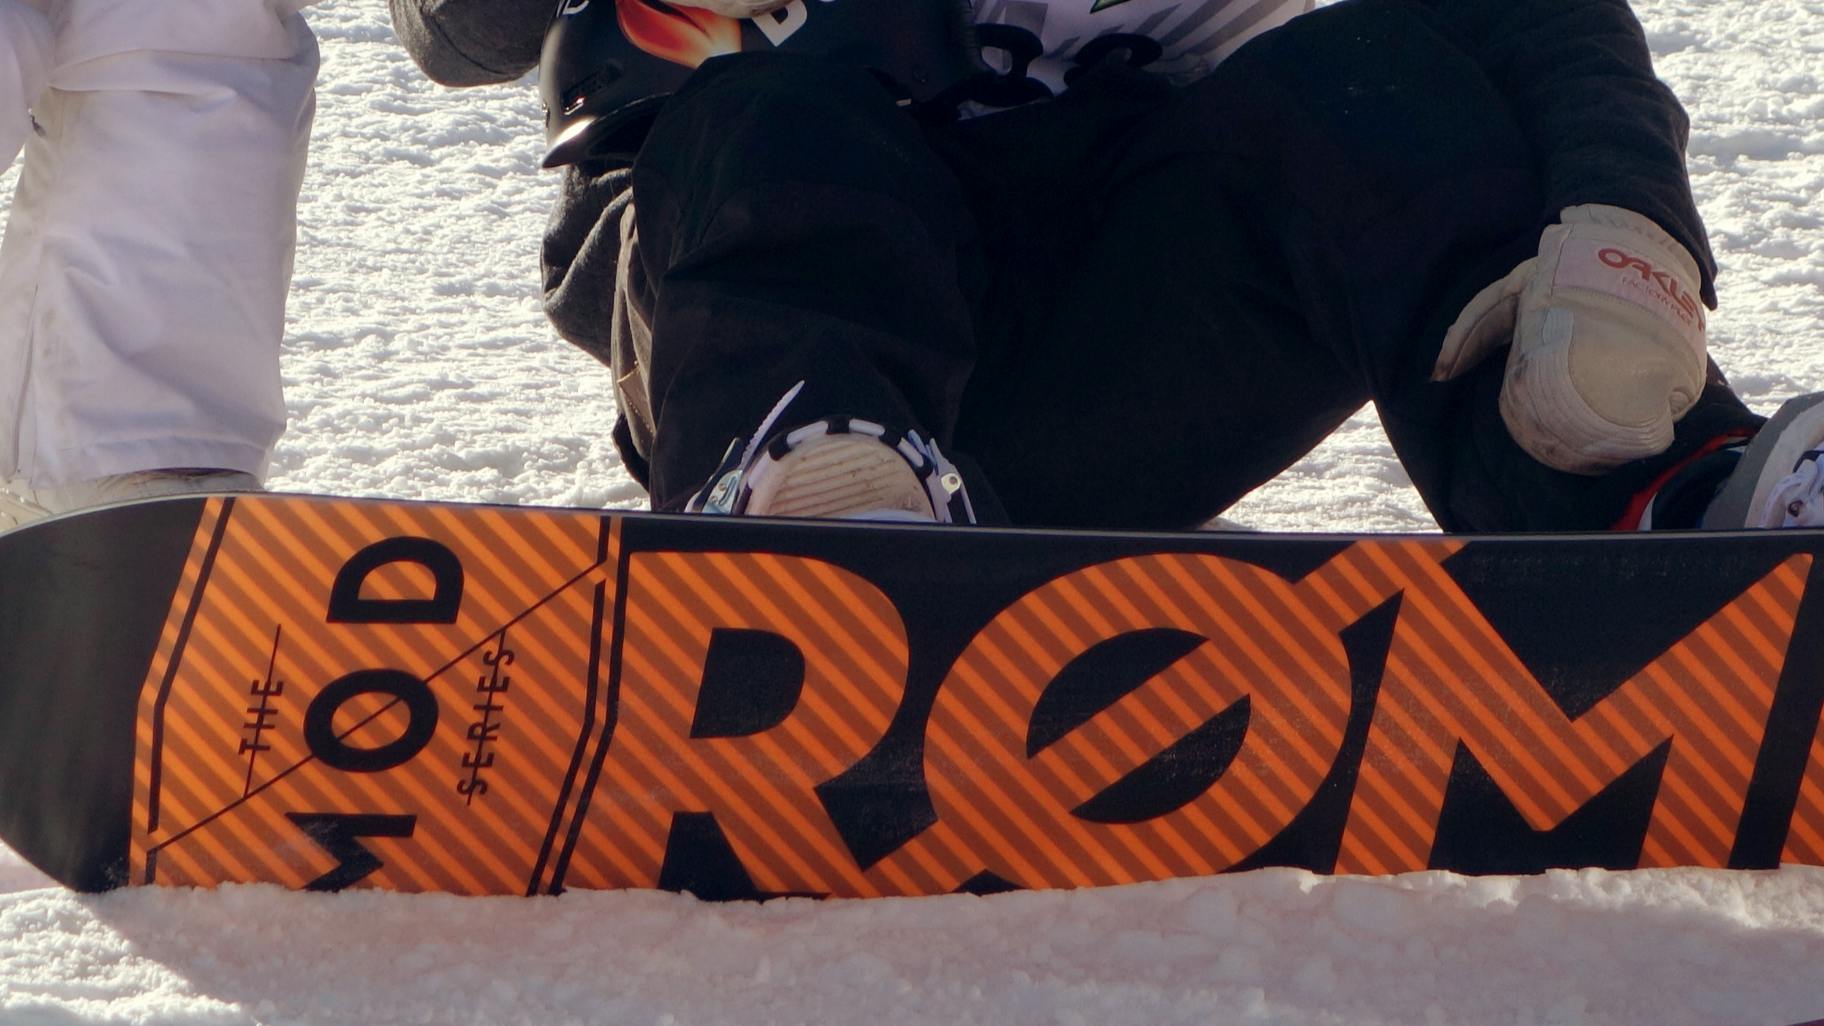 A snowboarder sitting on the ground with the bottom of his snowboard visible. The bottom of his snowboard says "ROME the MOD Series".